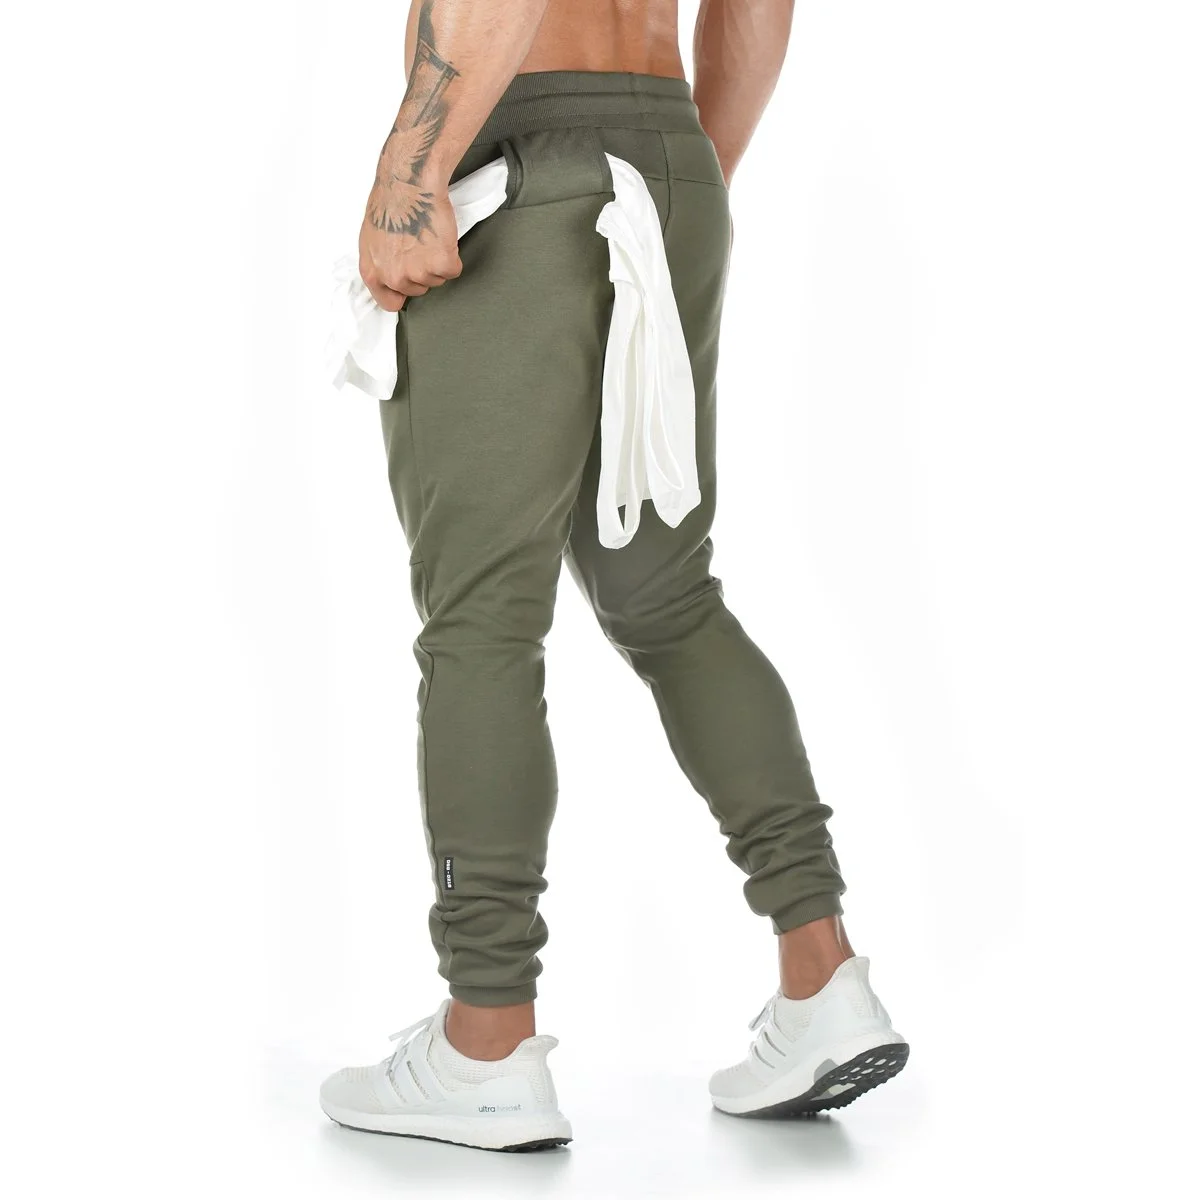 New Cotton Pants Running Tights Men Sporting Leggings Workout Sweatpants Joggers For Men Jogging Leggings Gyms Pants - Color: Army green